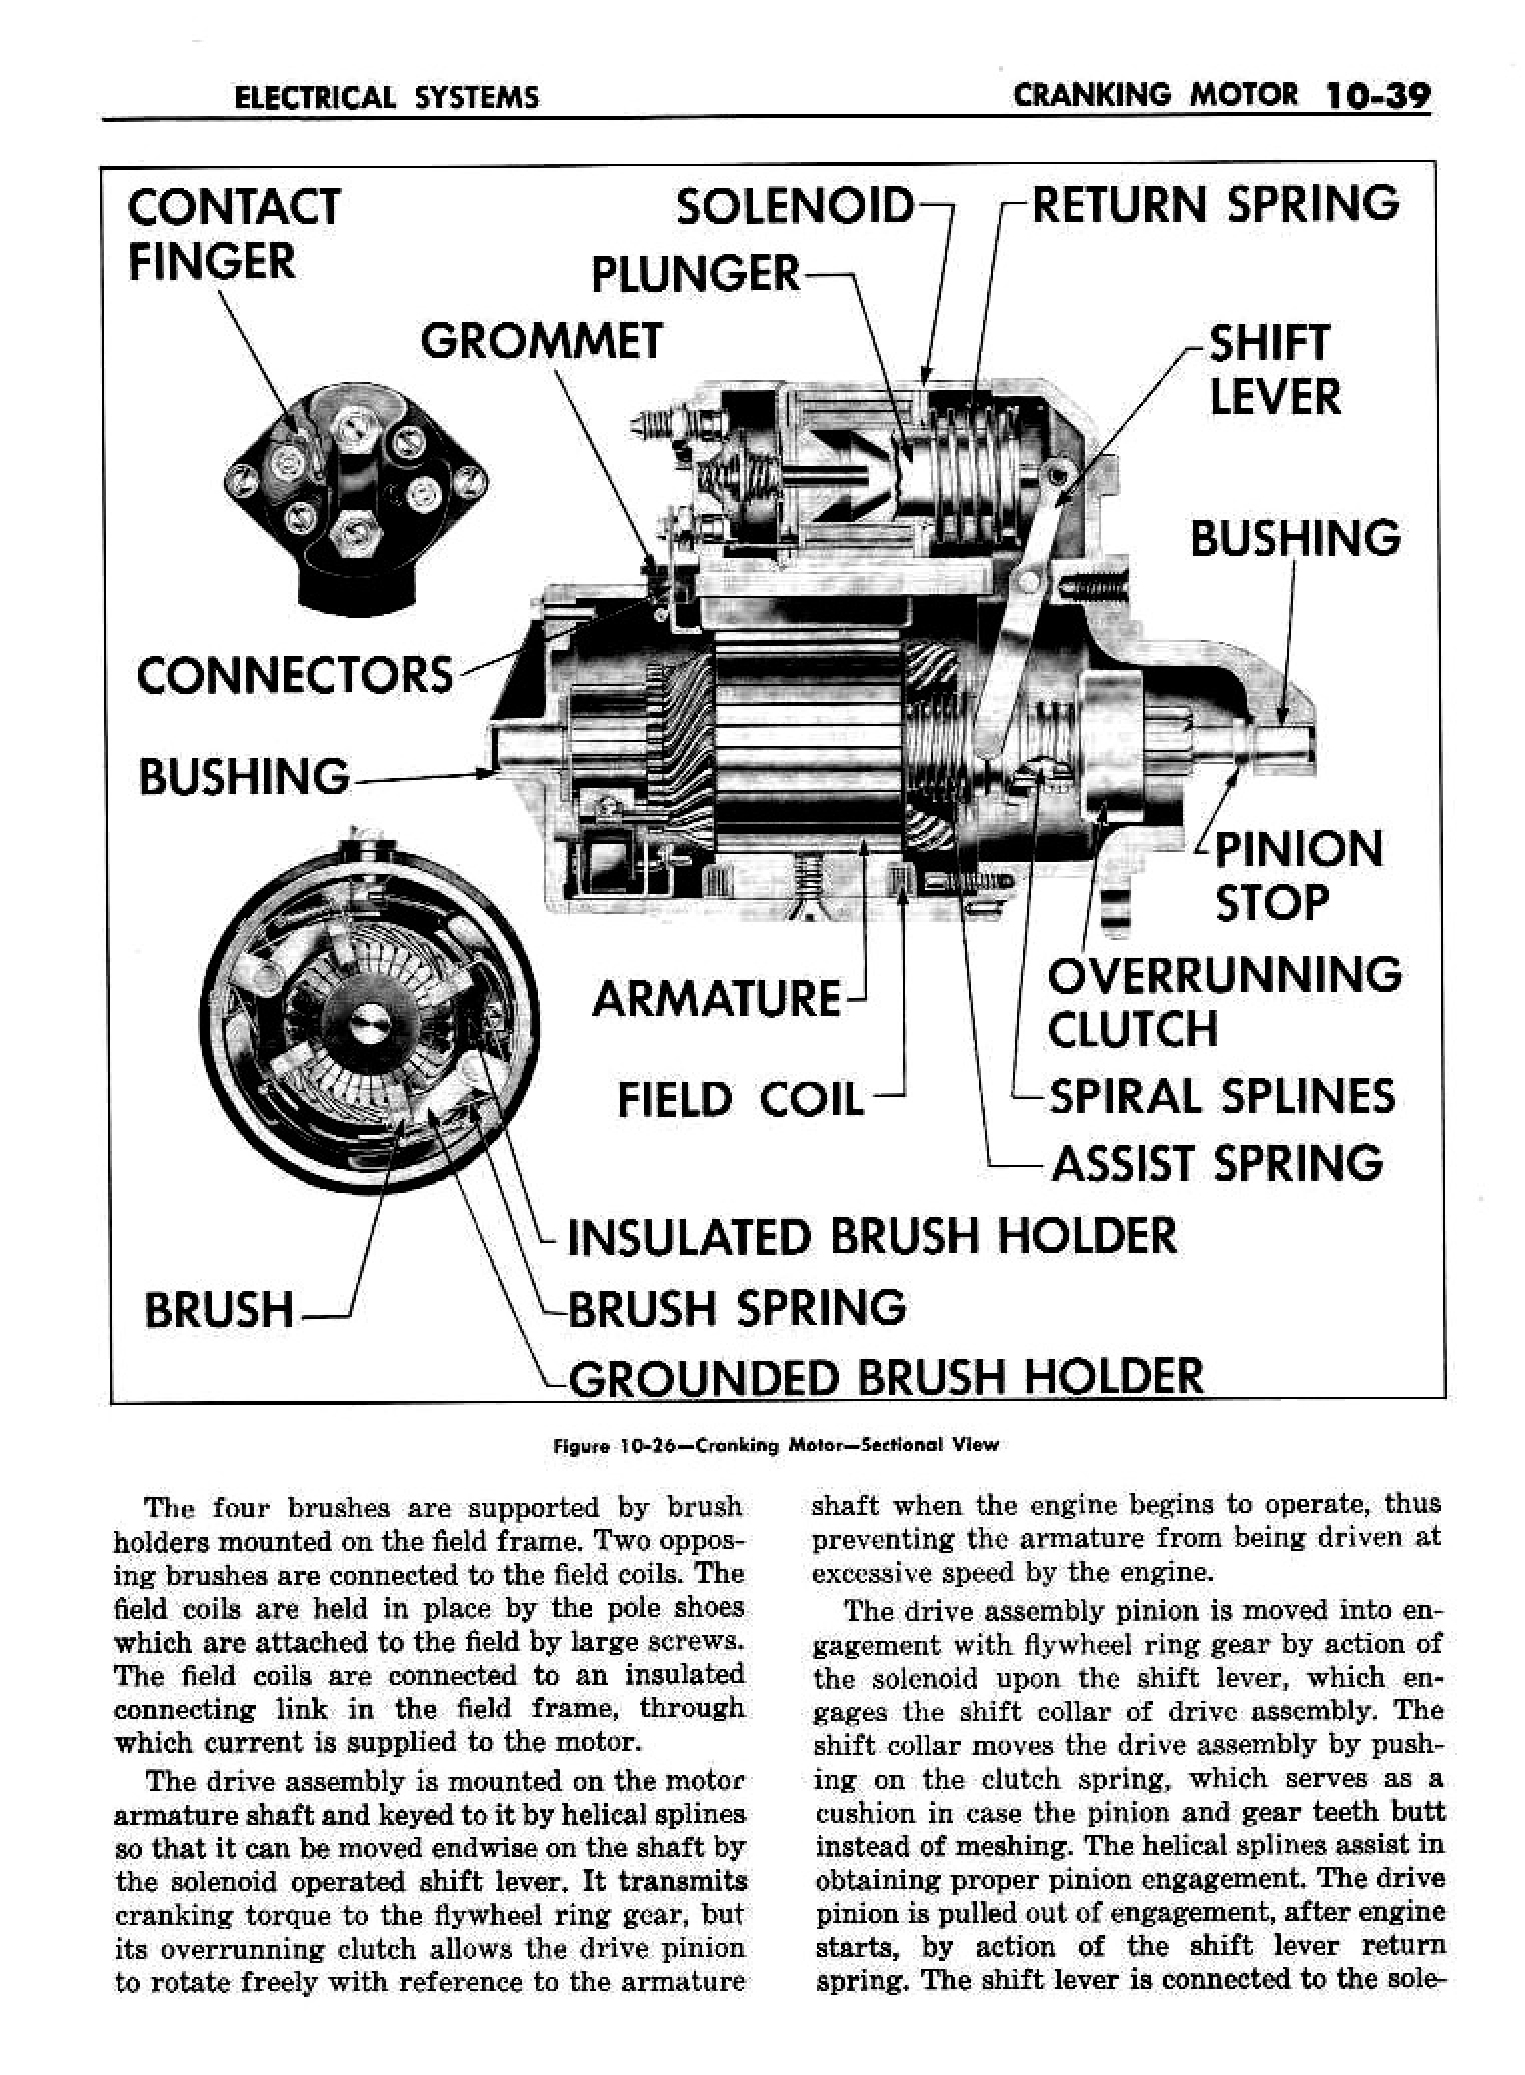 n_11 1958 Buick Shop Manual - Electrical Systems_39.jpg